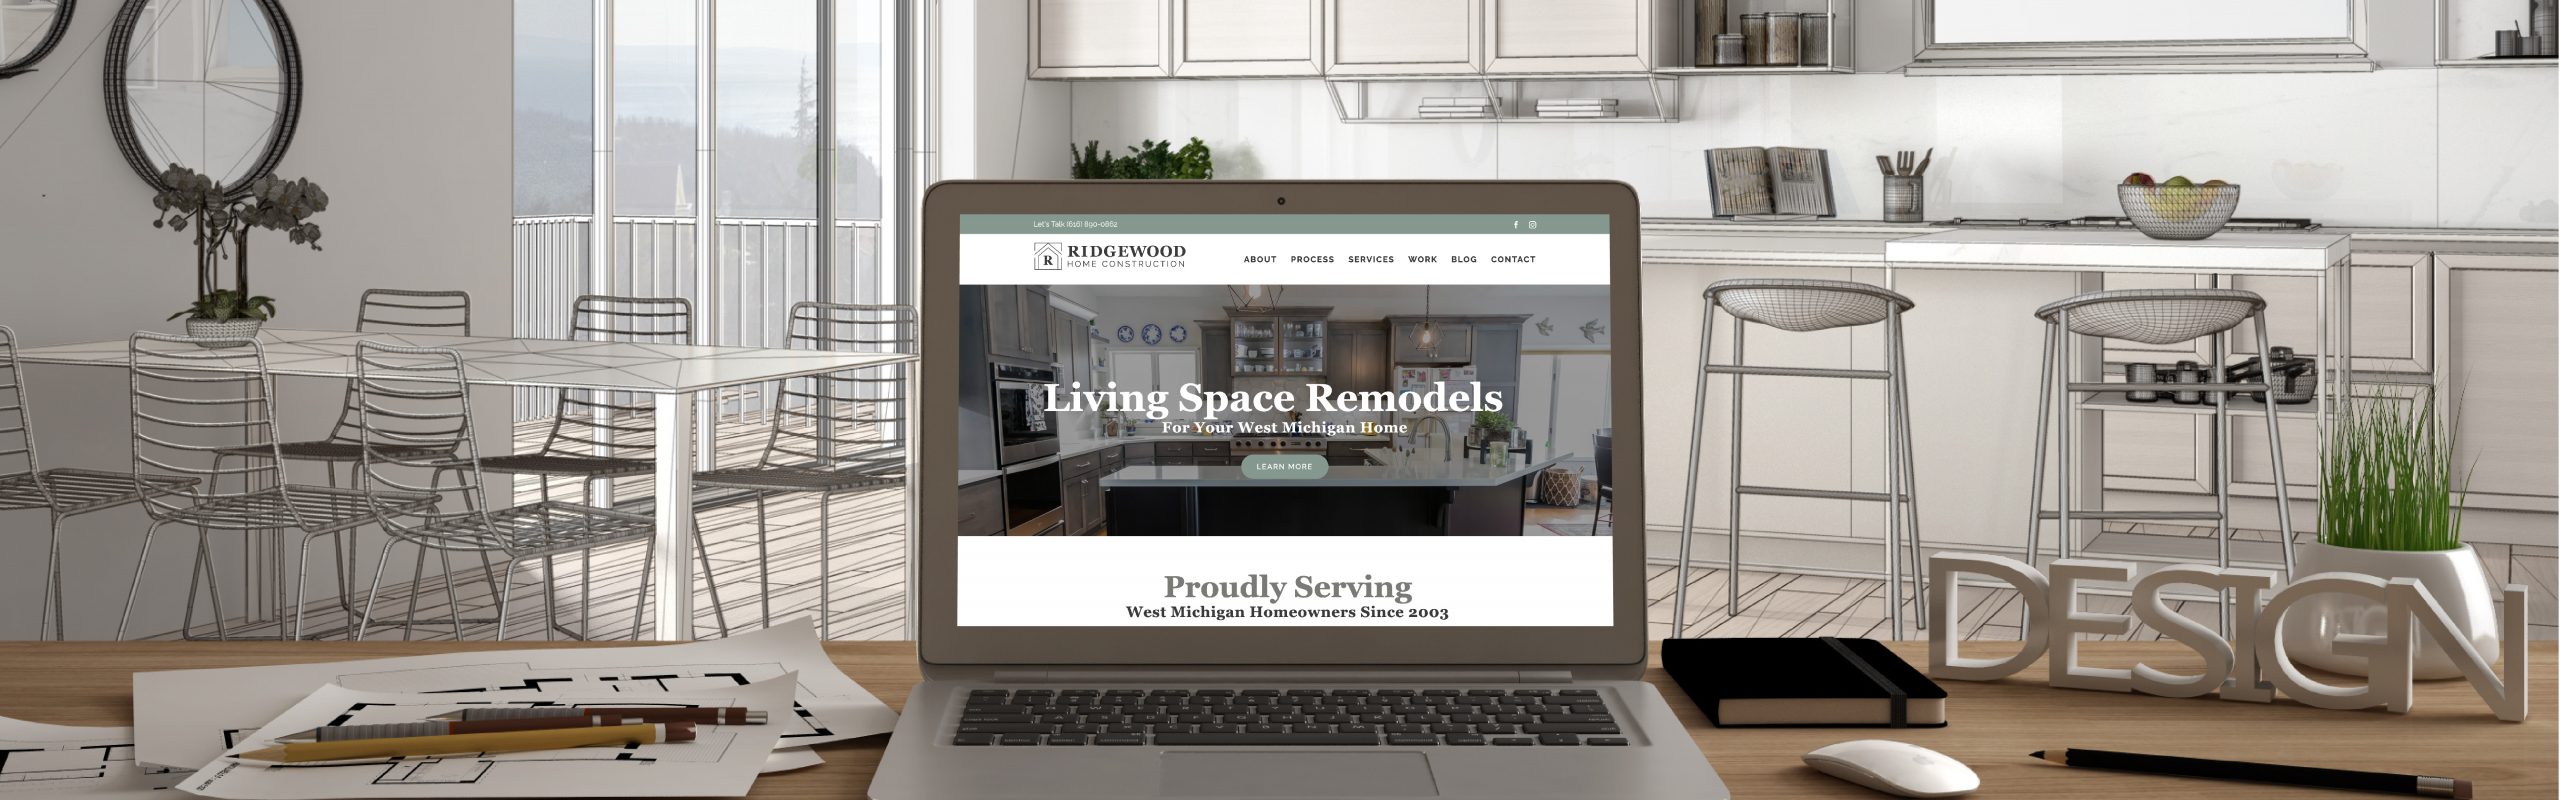 A laptop displaying a webpage about Ridgewood Home Construction's living space remodels, situated on a desk with architectural drawings and design materials in a modern kitchen setting.